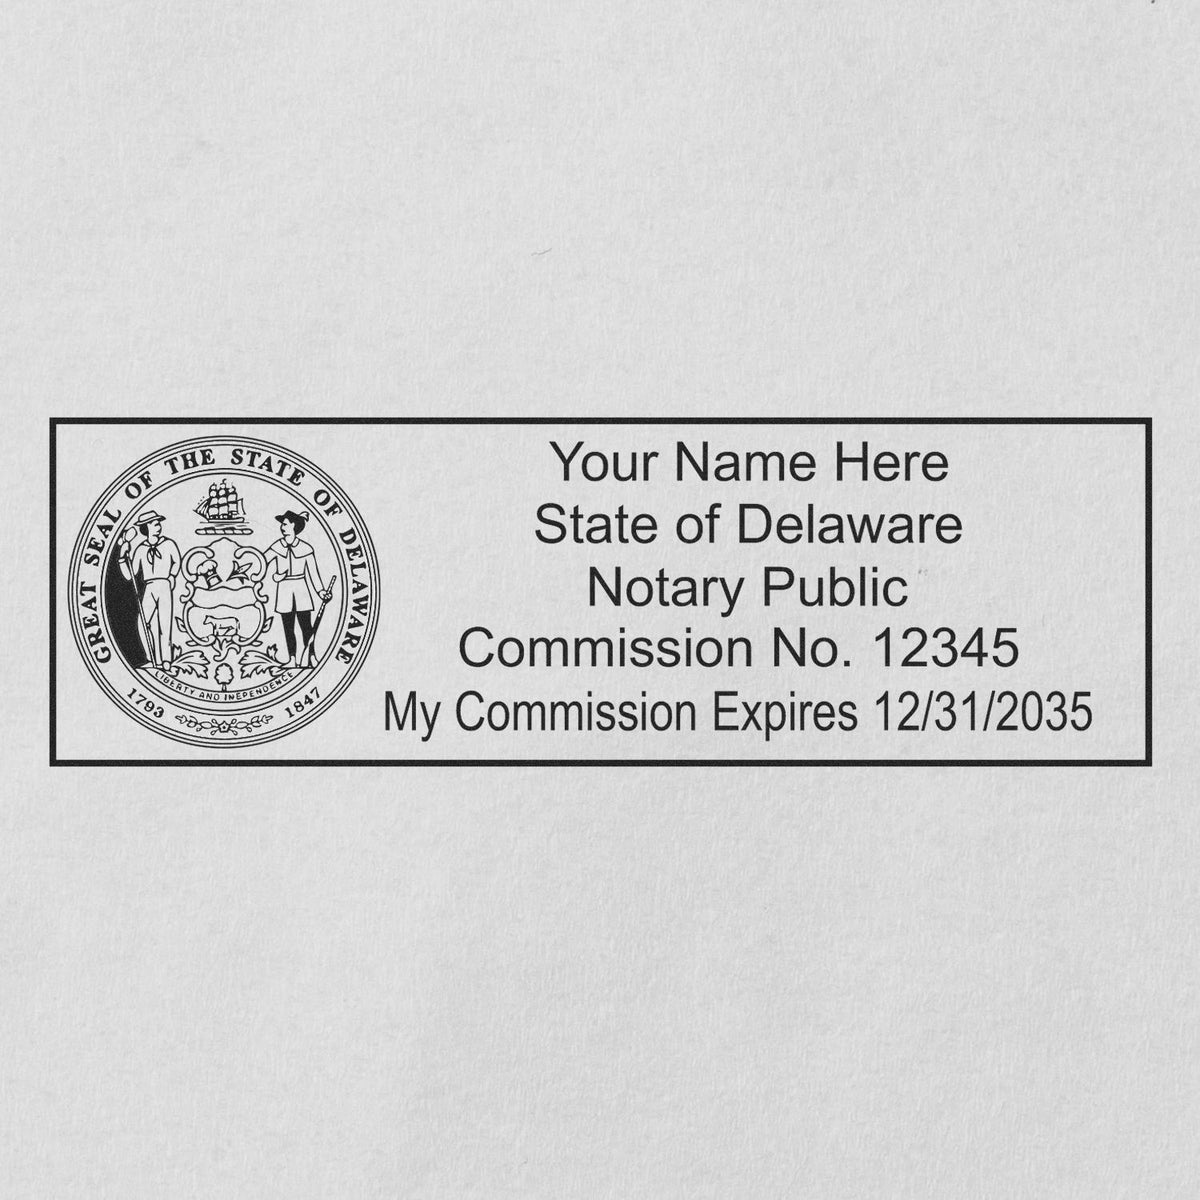 A photograph of the Heavy-Duty Delaware Rectangular Notary Stamp stamp impression reveals a vivid, professional image of the on paper.